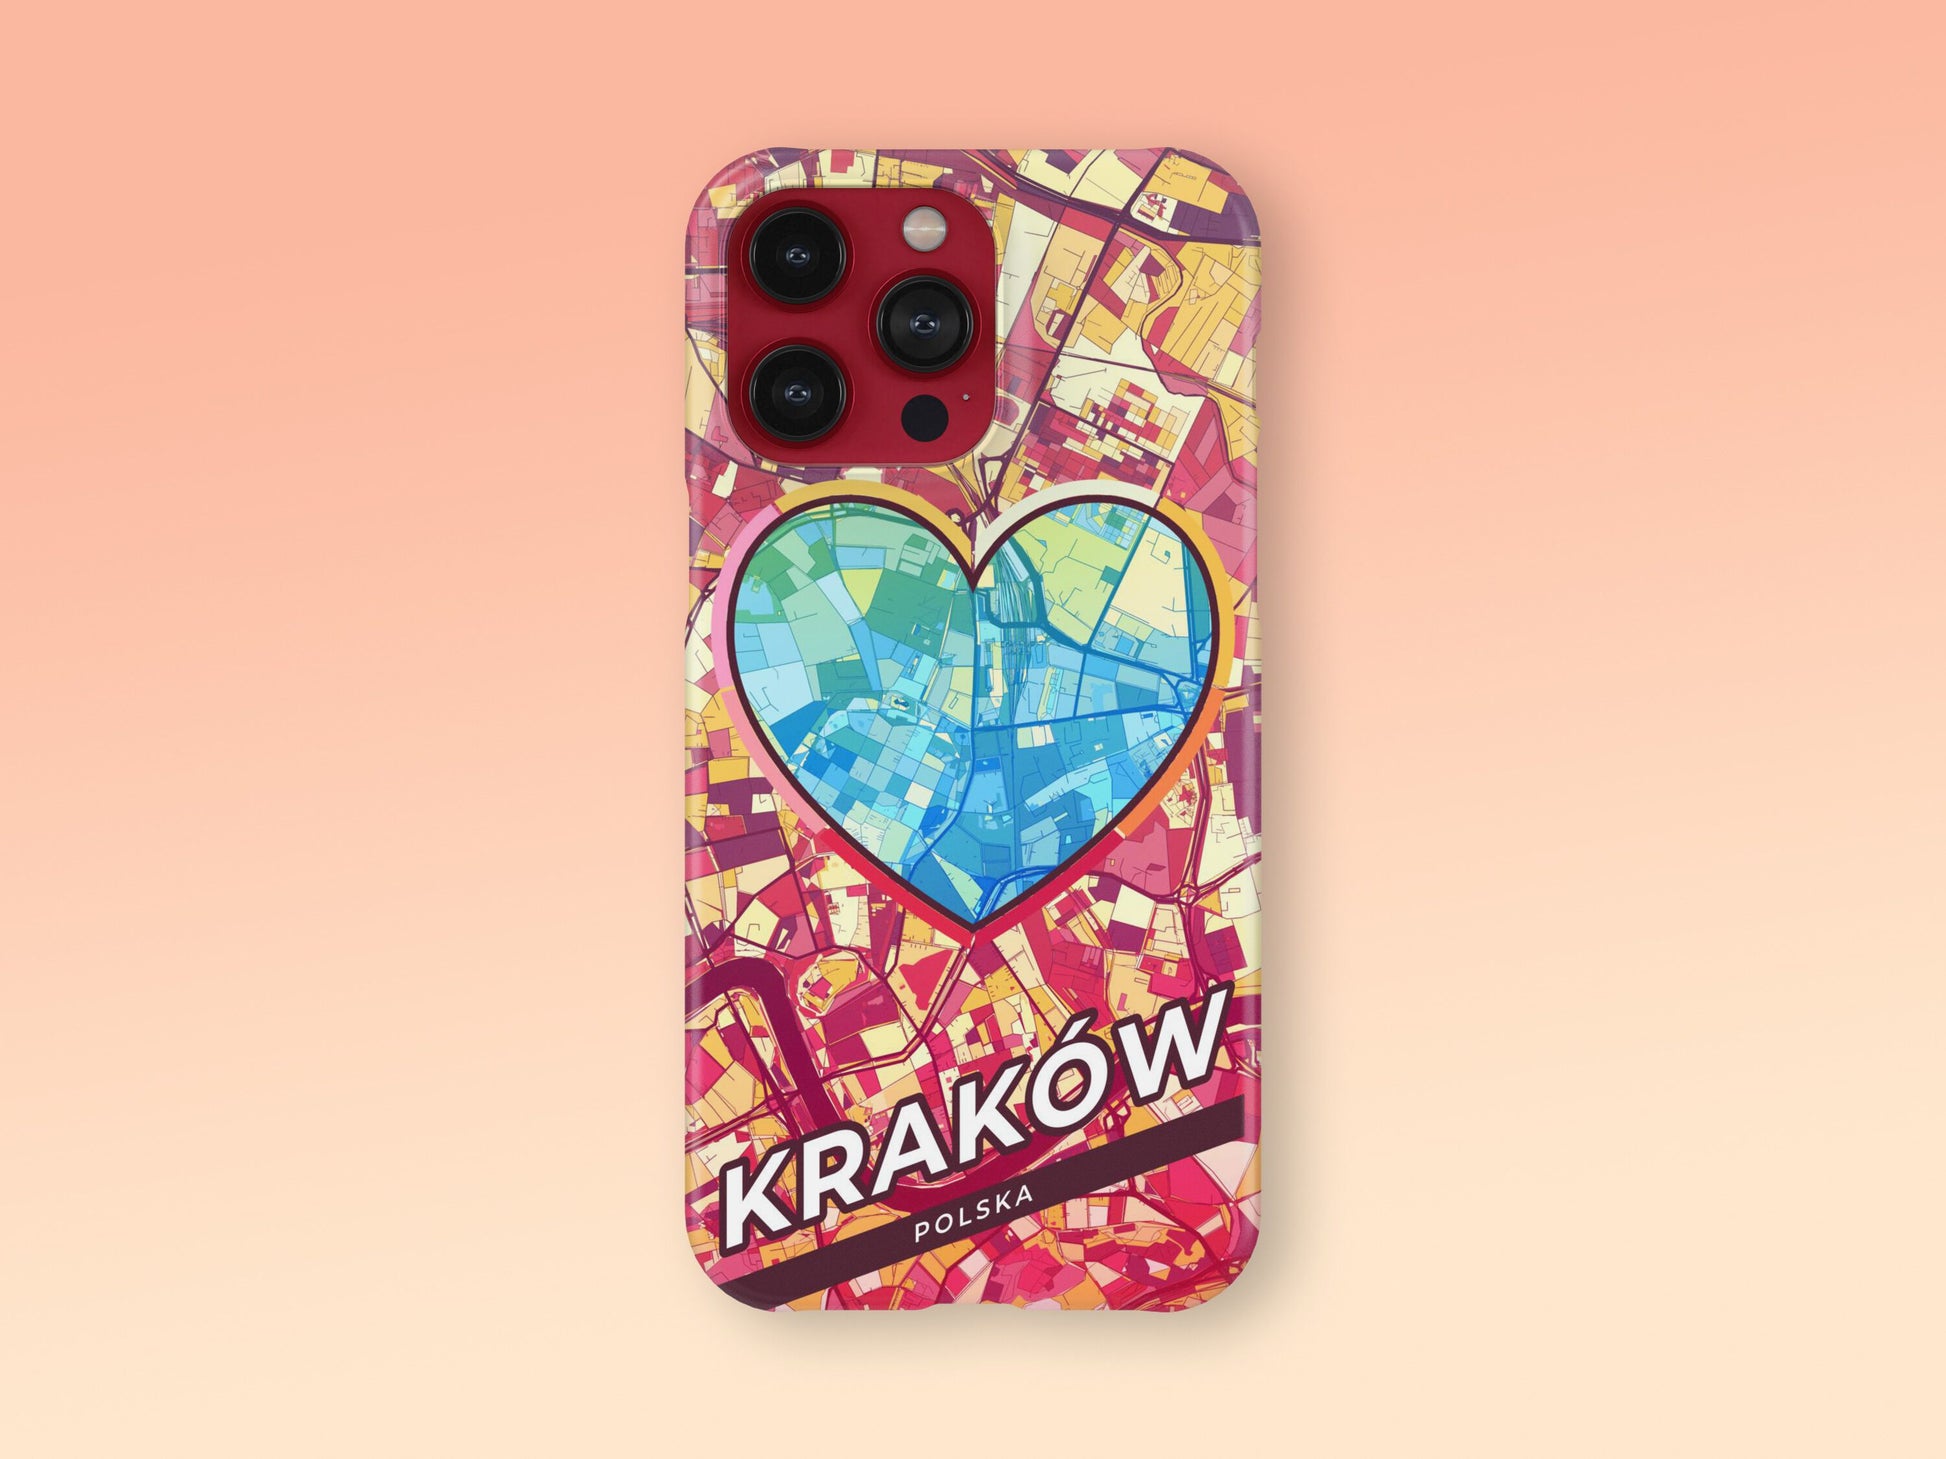 Kraków Poland slim phone case with colorful icon. Birthday, wedding or housewarming gift. Couple match cases. 2